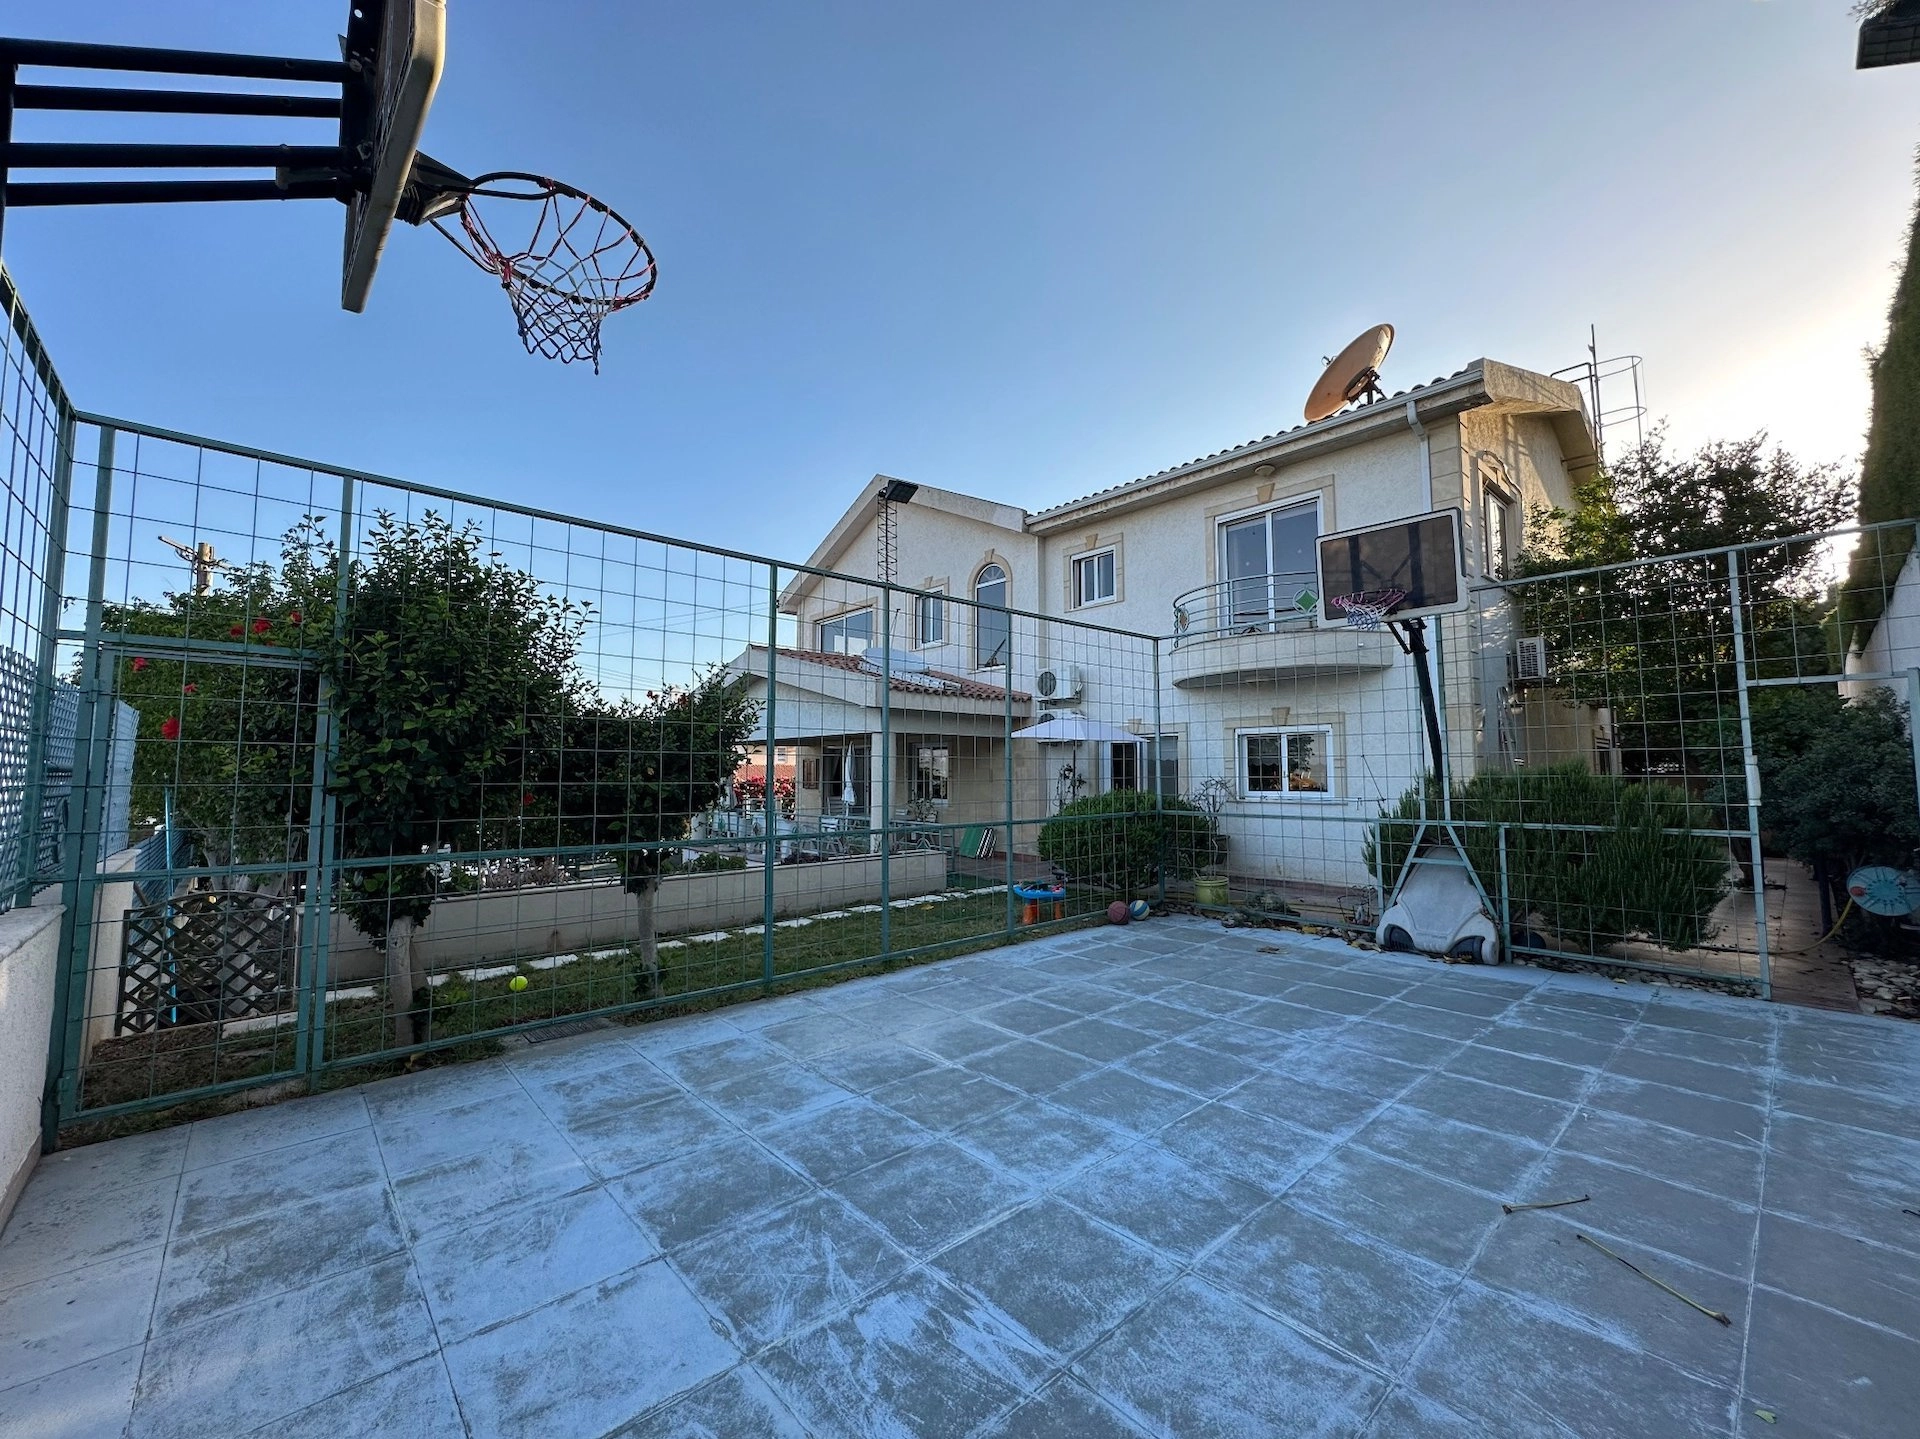 6+ Bedroom House for Sale in Limassol – Panthea